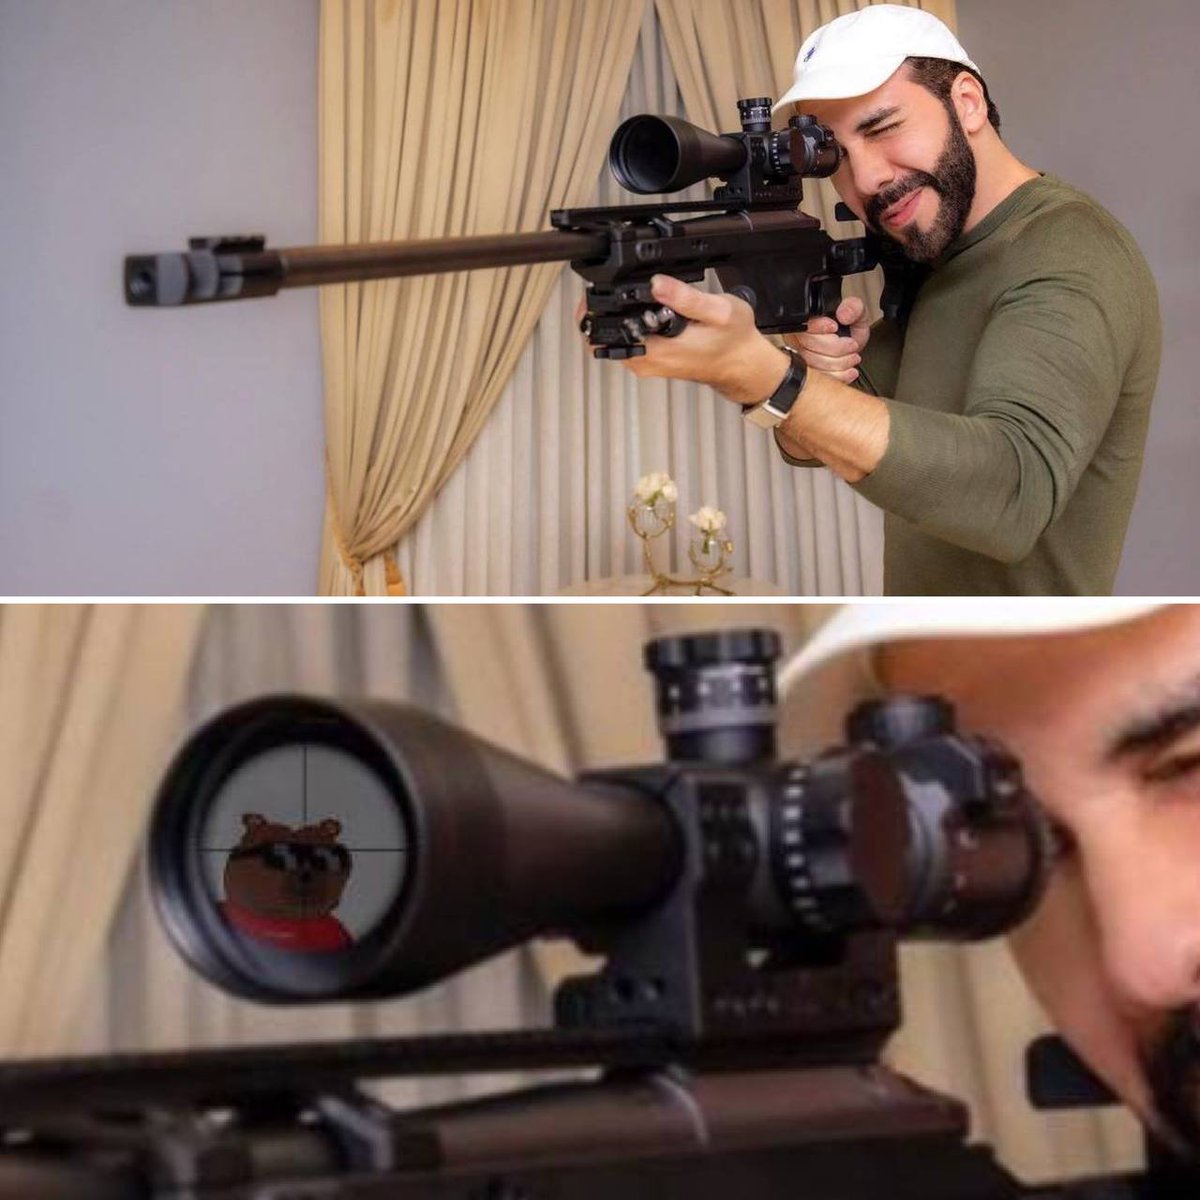 take the shot @nayibbukele it is time.